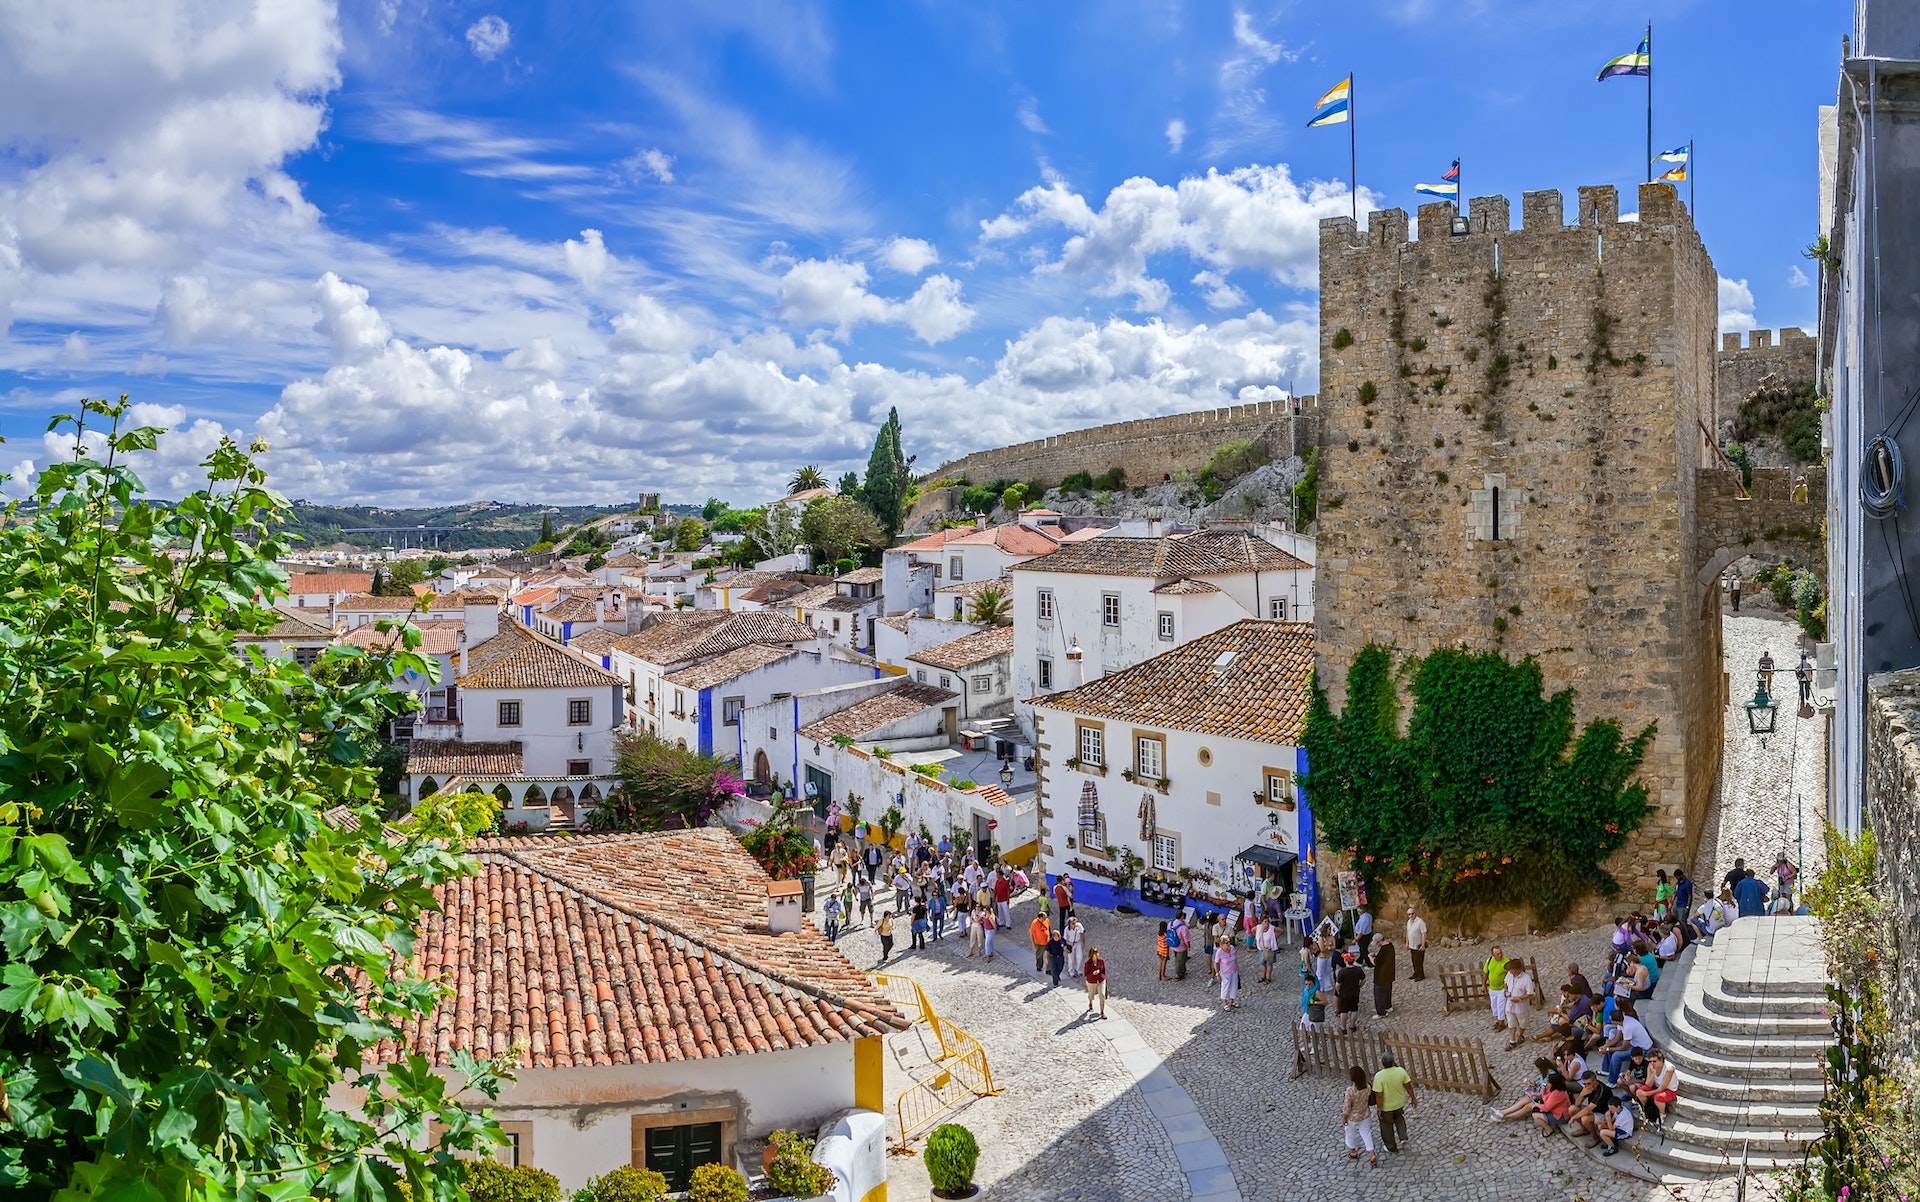 An aerial view of the medieval houses, wall and tower of Obidos, Portugal. The street is filled with crowds of people.